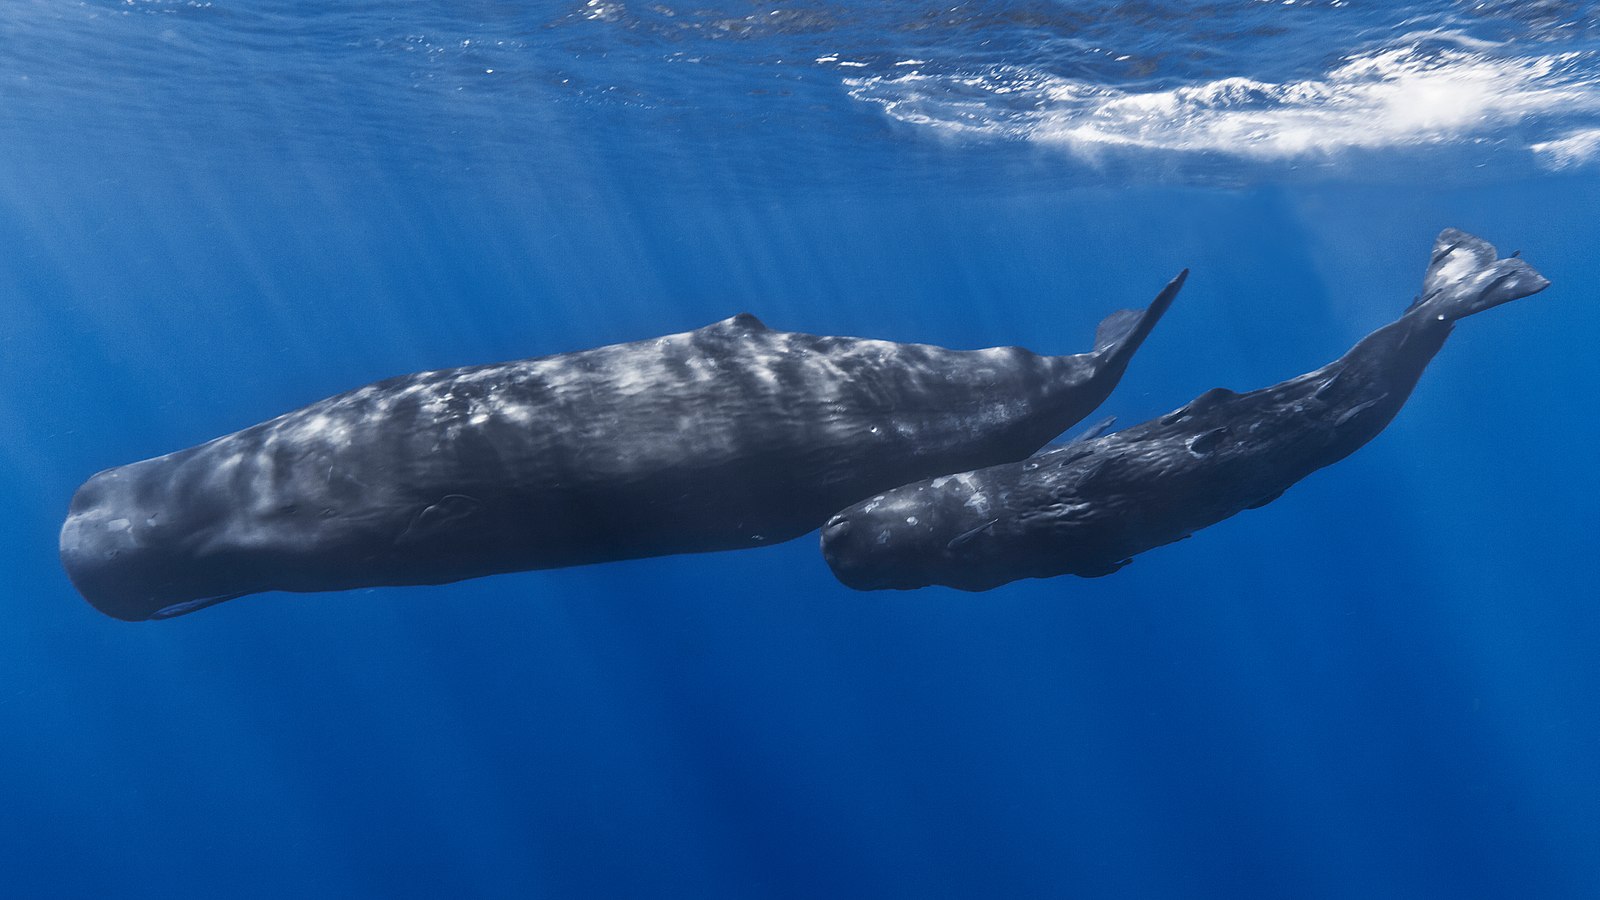 The view from a sperm whale’s nose